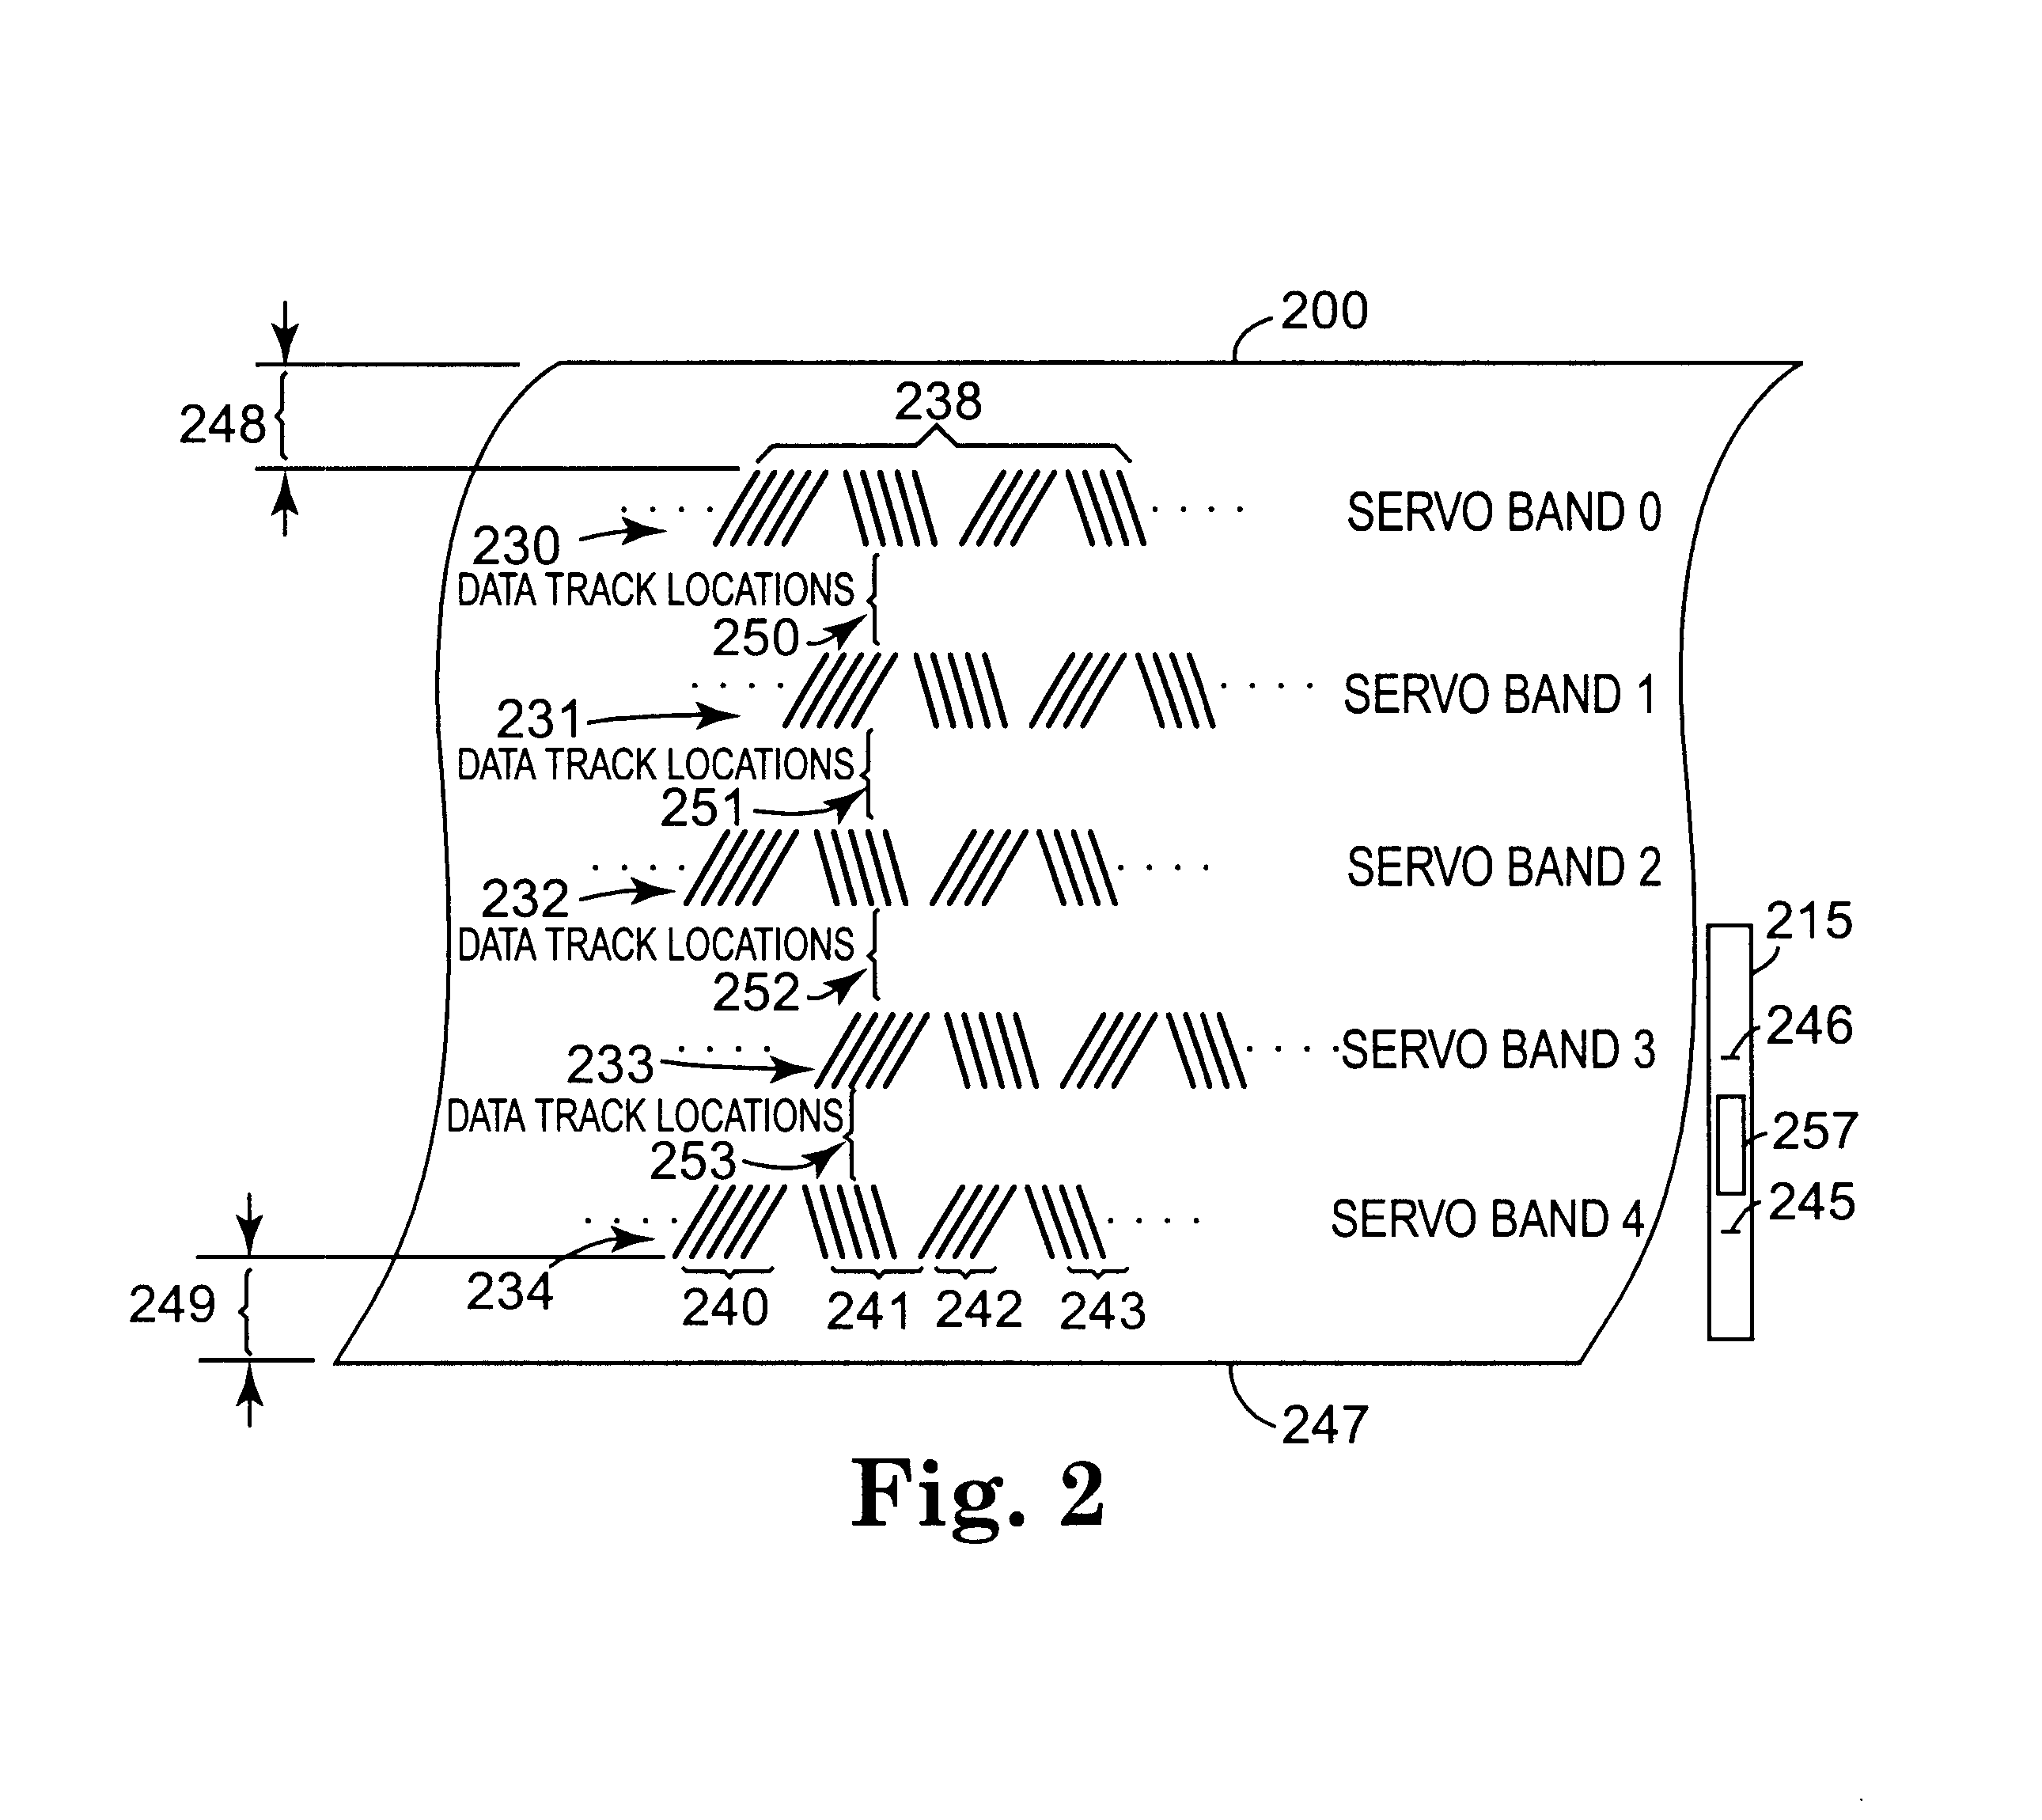 Method and apparatus for compensating for media shift due to tape guide